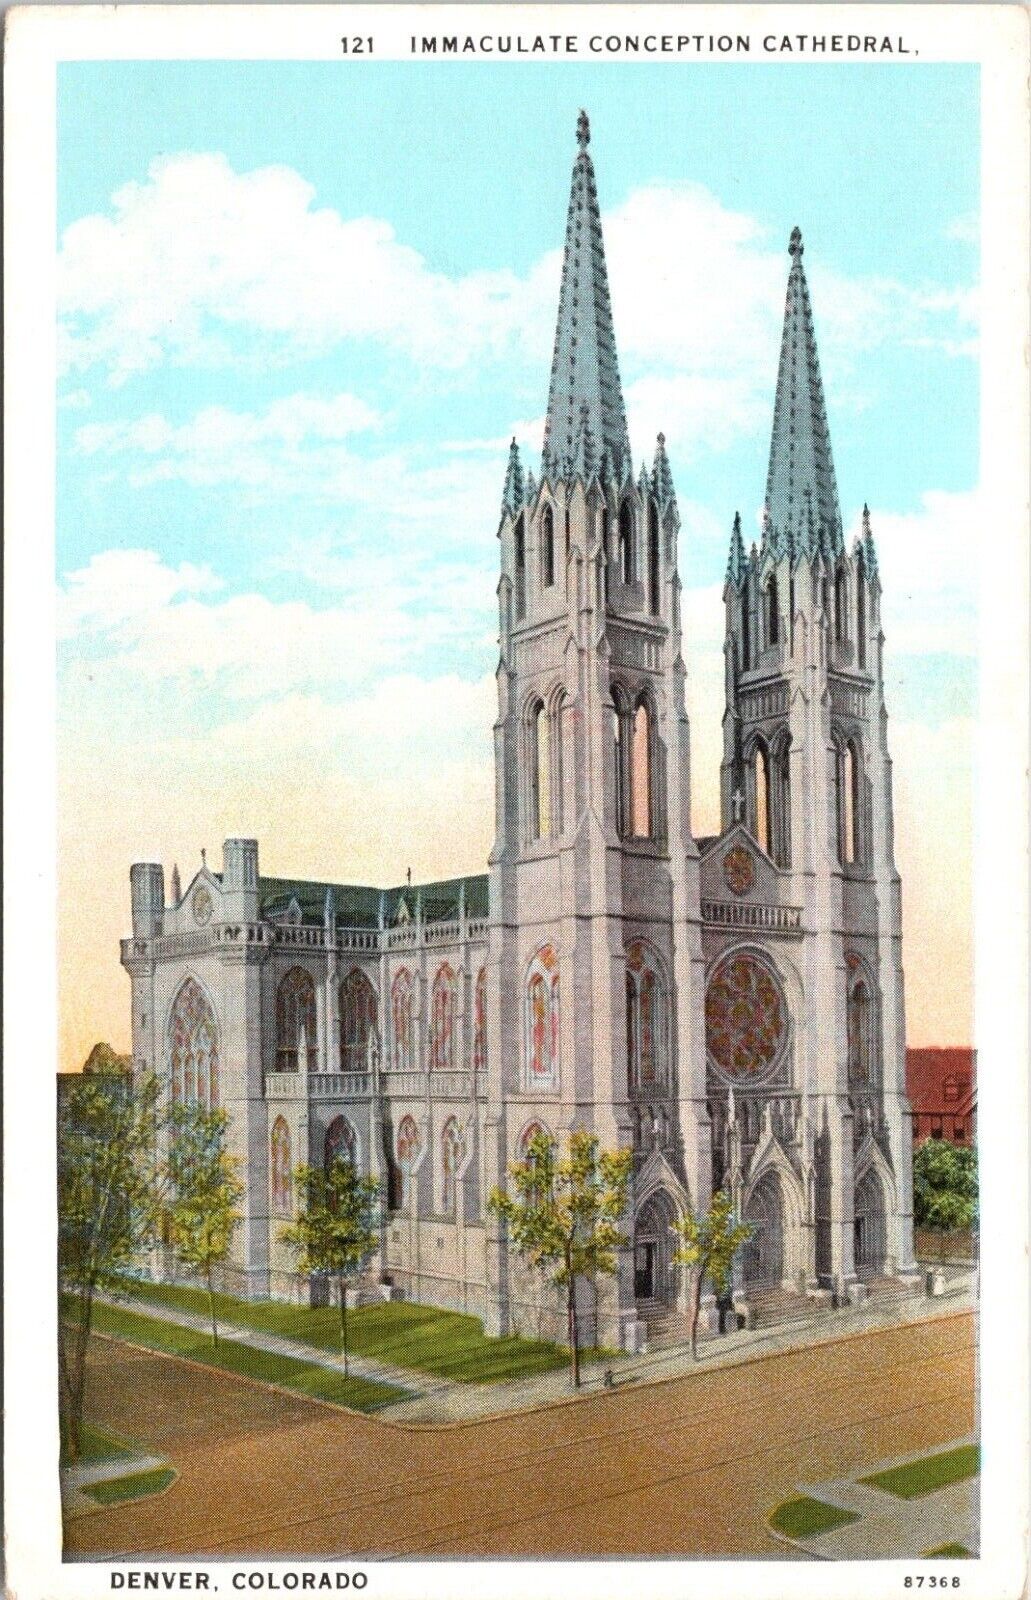 C.1920s Denver CO Immaculate Conception Cathedral Church Colorado Postcard A320